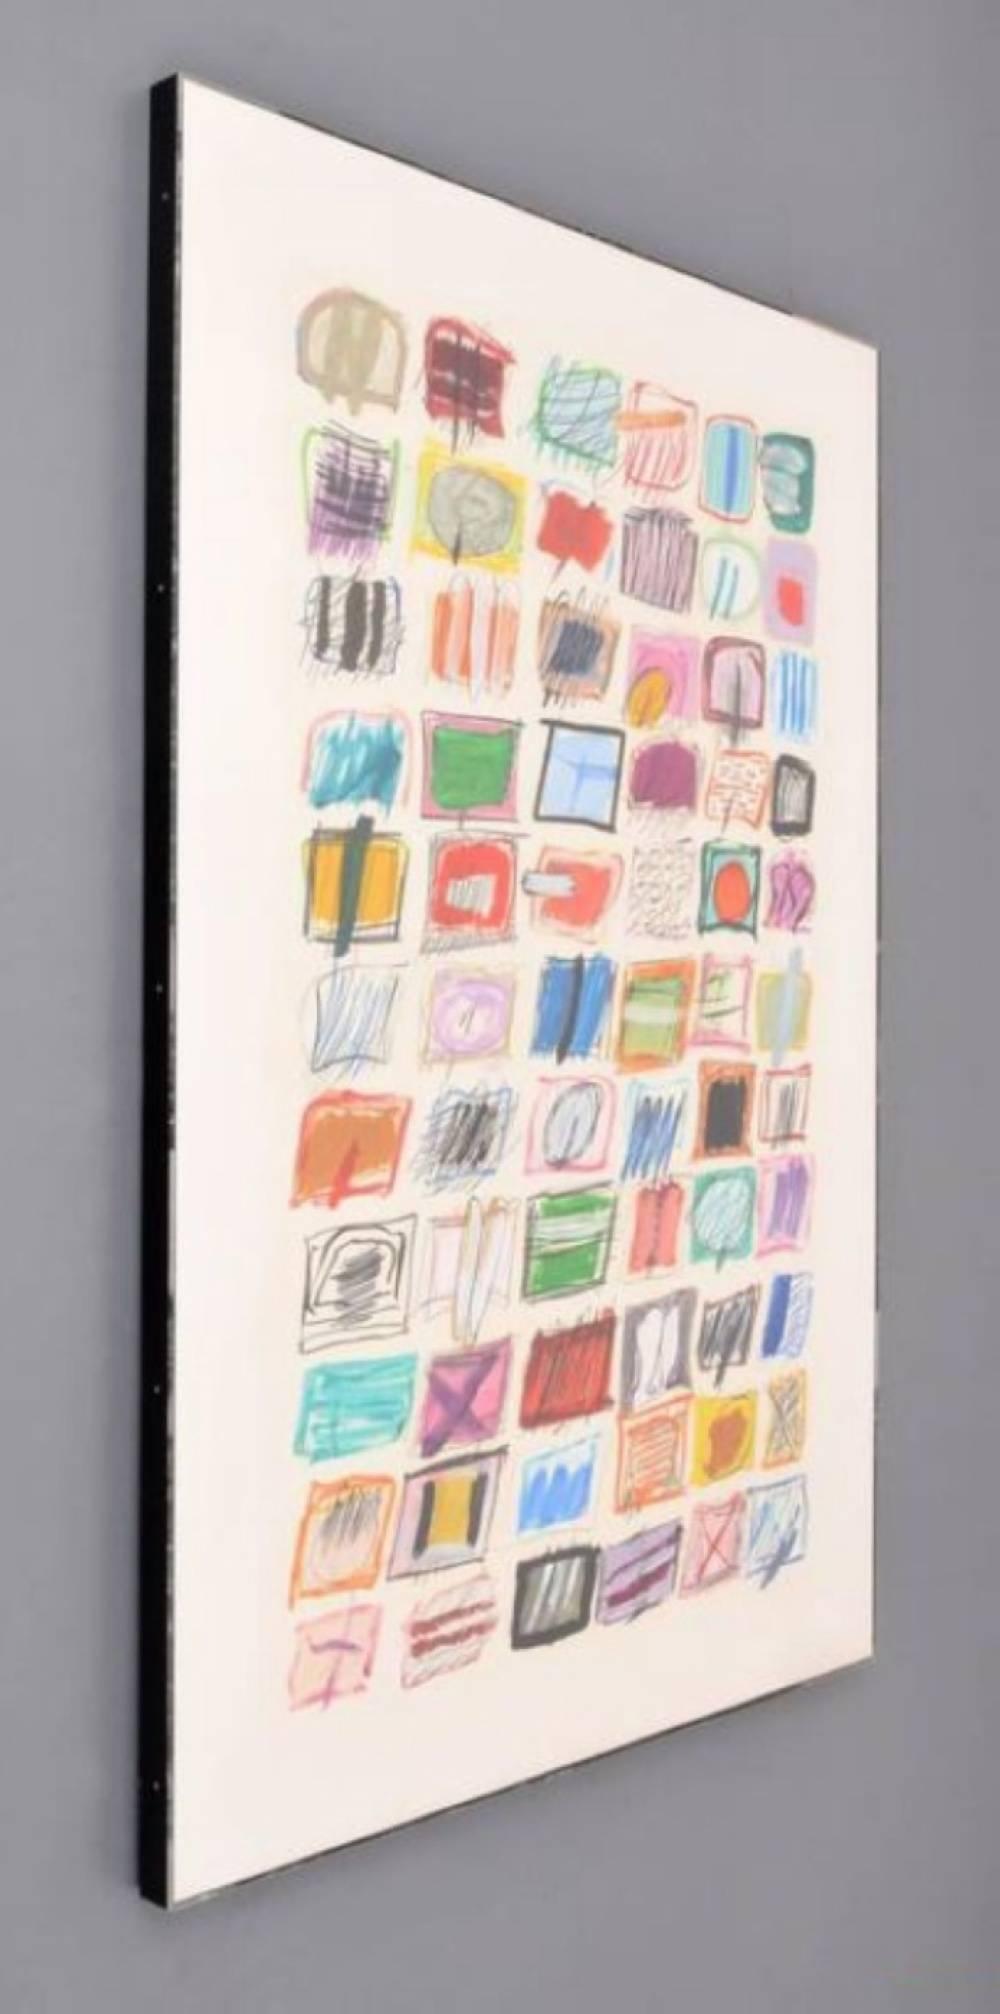 Large mixed media on paper titled CLUSTER DRAWING B by Ida Rittenberg Kohlmeyer (American, 1912-1997). Sale includes copies of original purchase documents from the artist's Louisiana studio and correspondence between collector and artist.